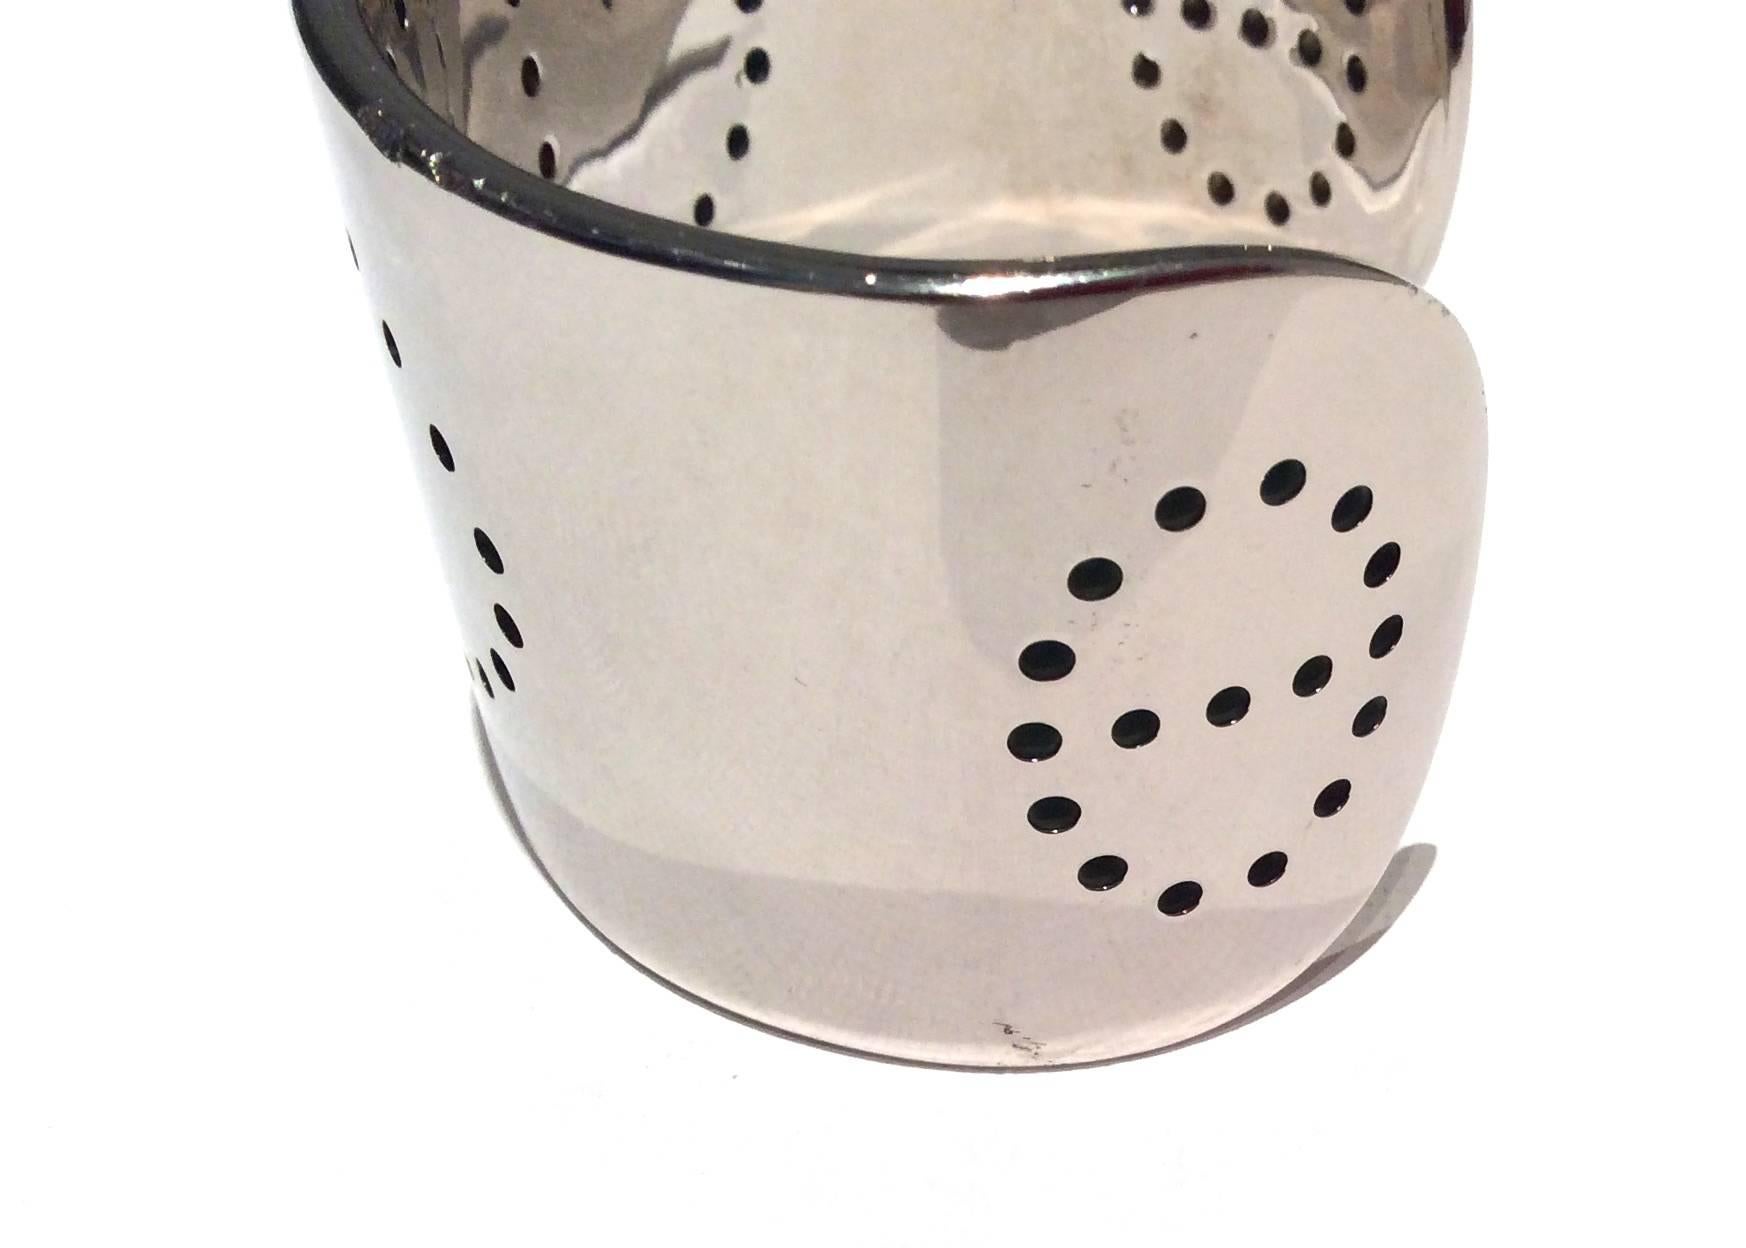 Presented here is an Hermes Eclipse cuff bracelet. The bracelet is solid sterling silver throughout. The bracelet has the classic perforated 'H' on the center of the cuff. There are two perforated circles on either end of the cuff as well. The total